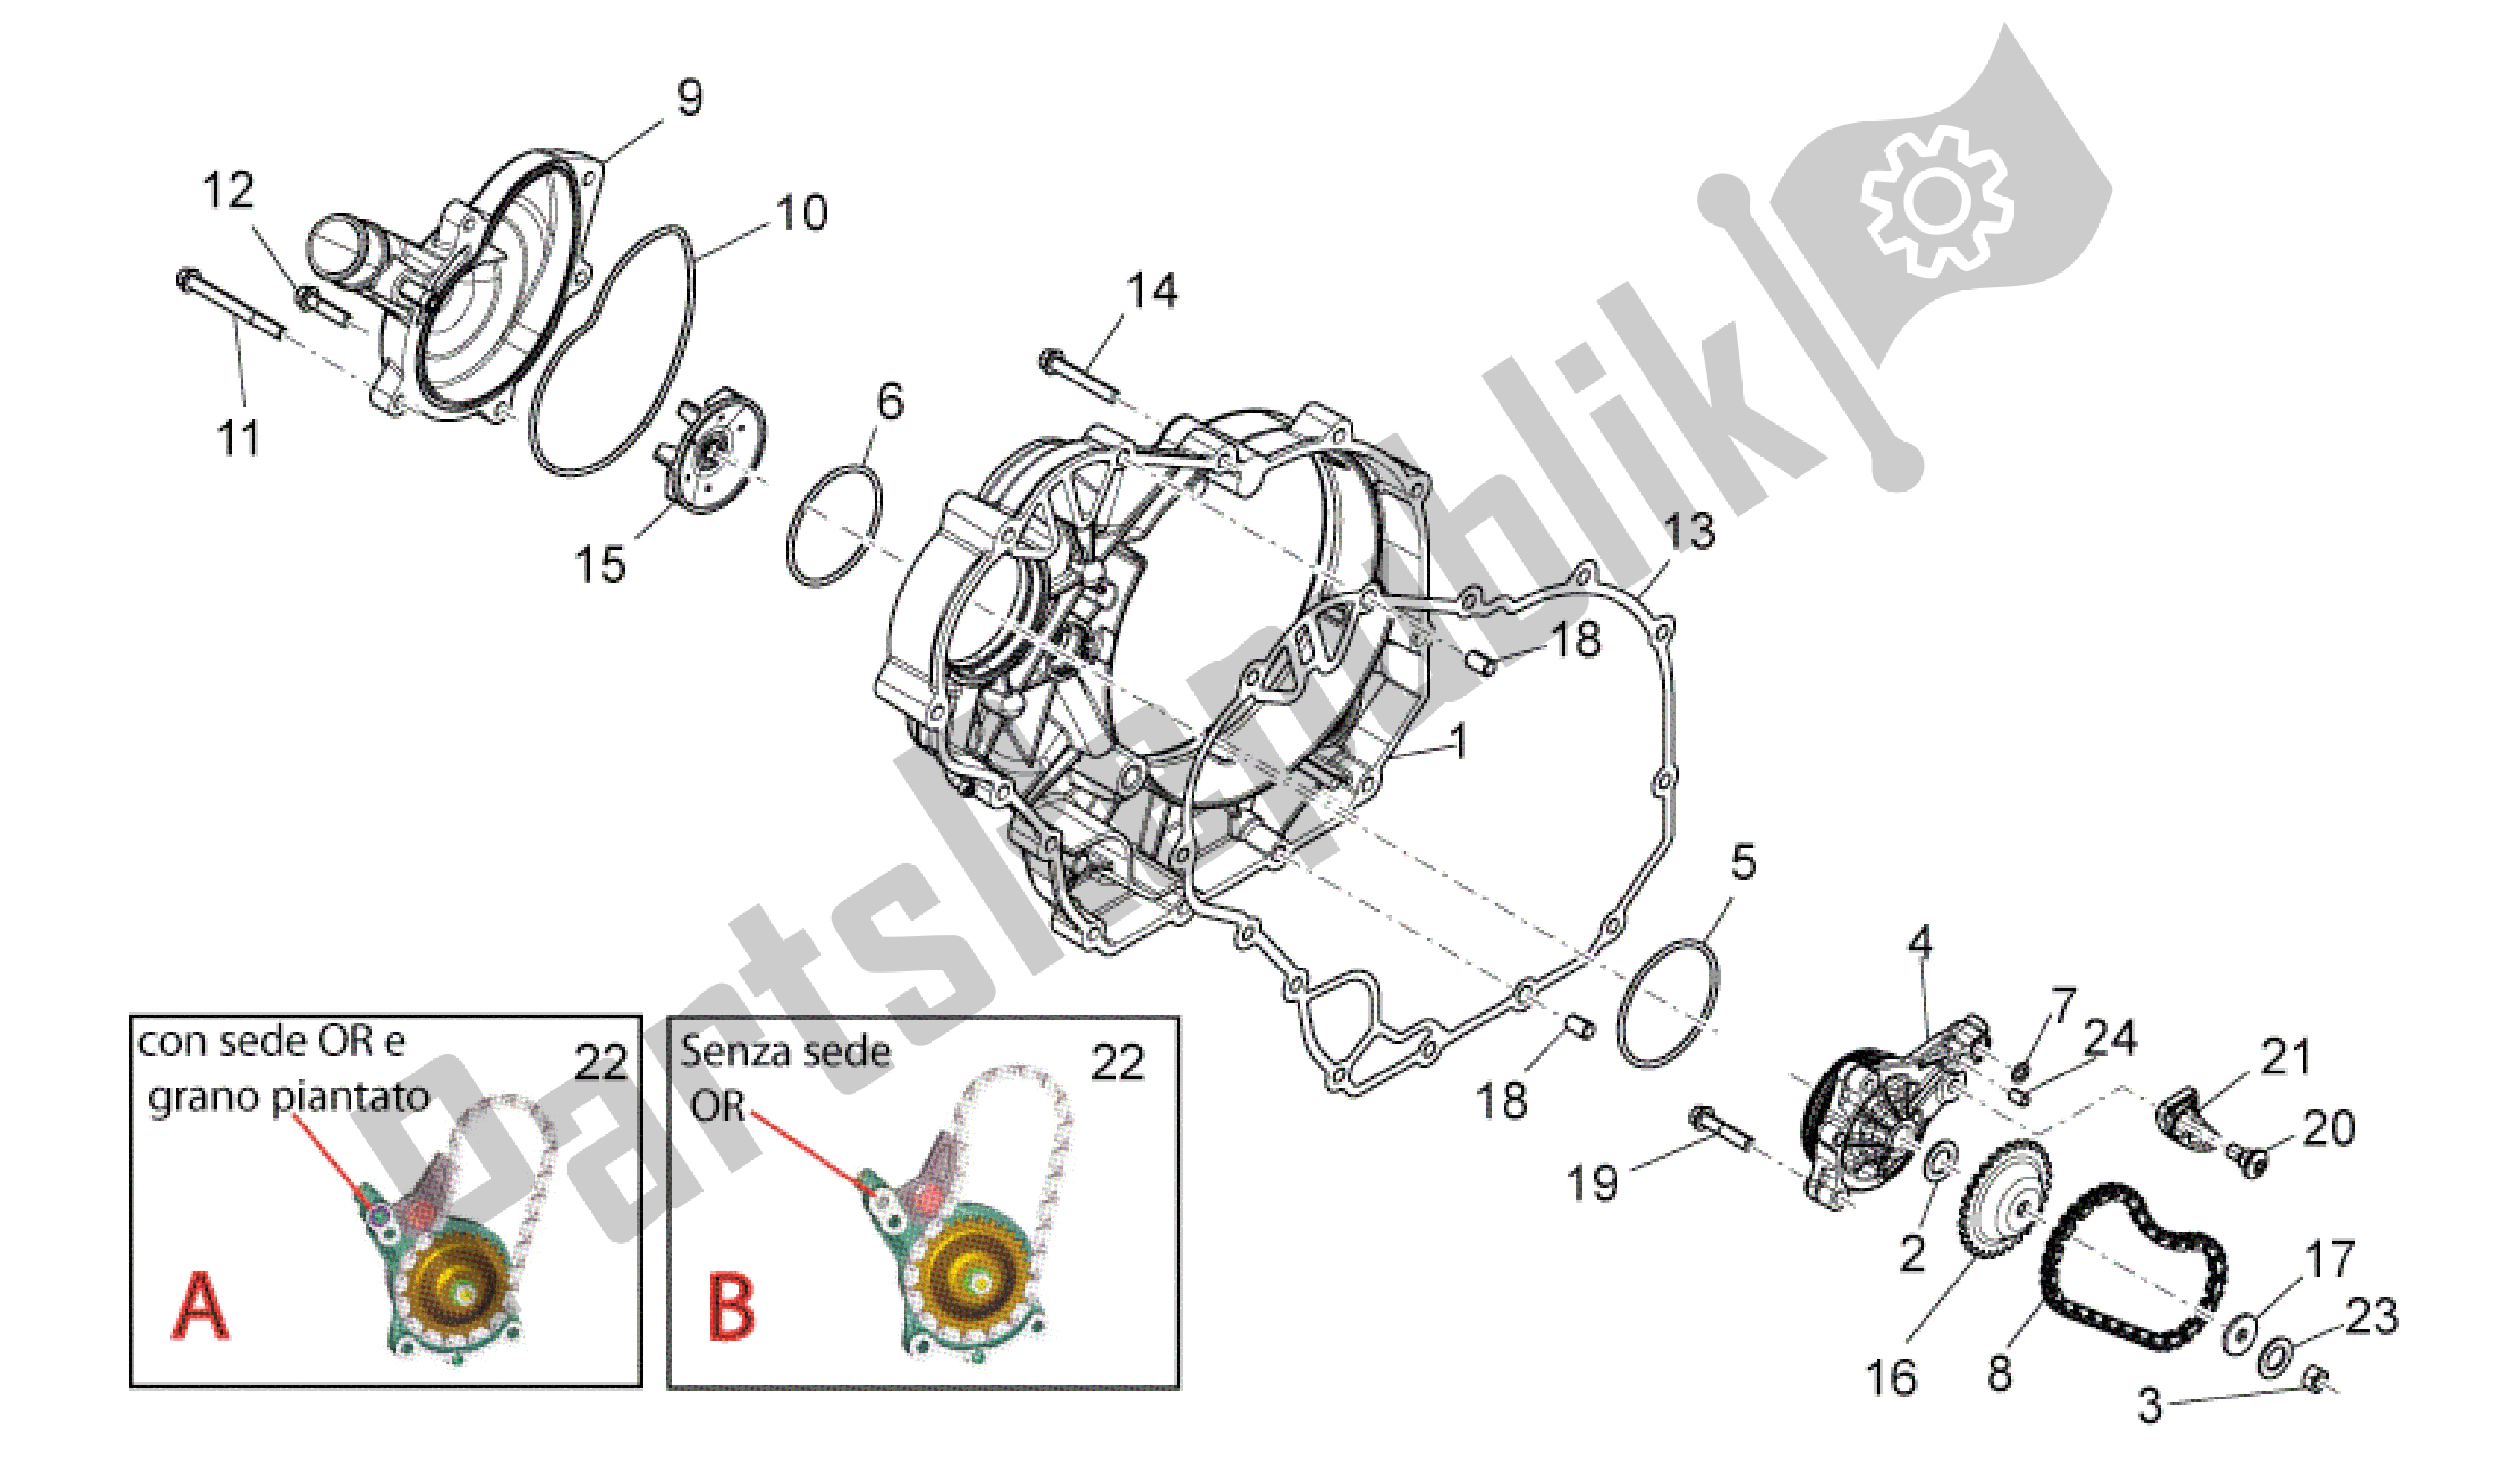 All parts for the Water Pump Ii of the Aprilia Shiver 750 2011 - 2013